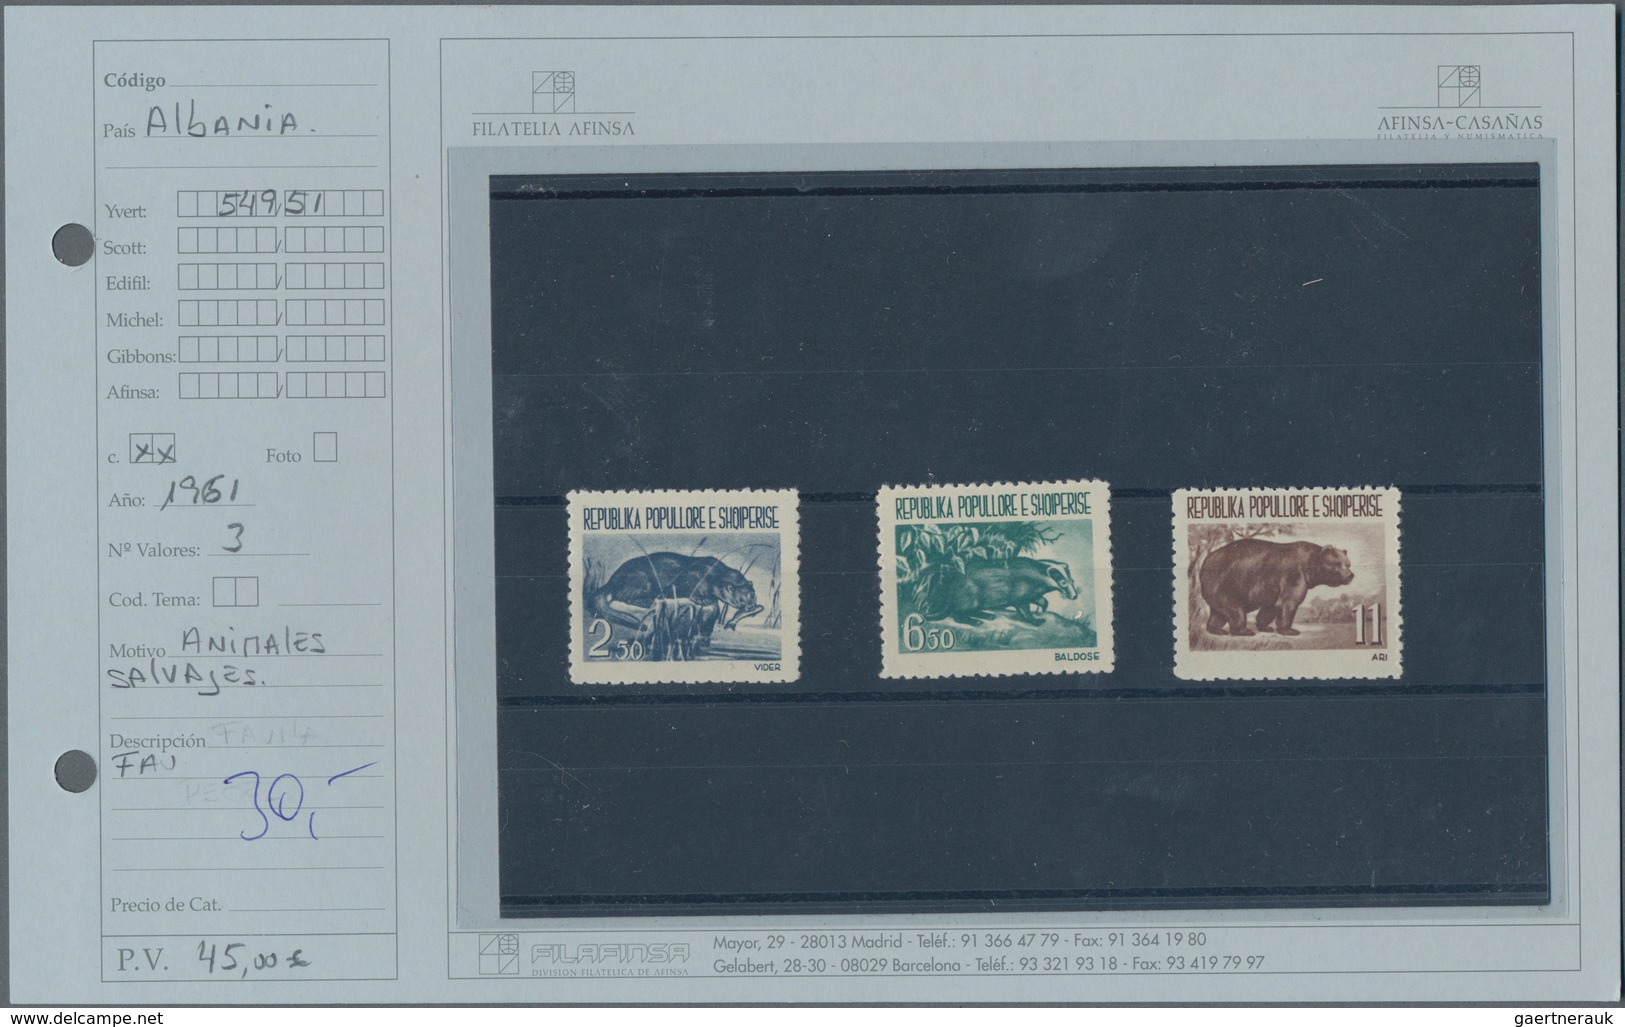 Albanien: 1922/1994, collection/accumulation on stockcards sorted by years, mostly mint never hinged